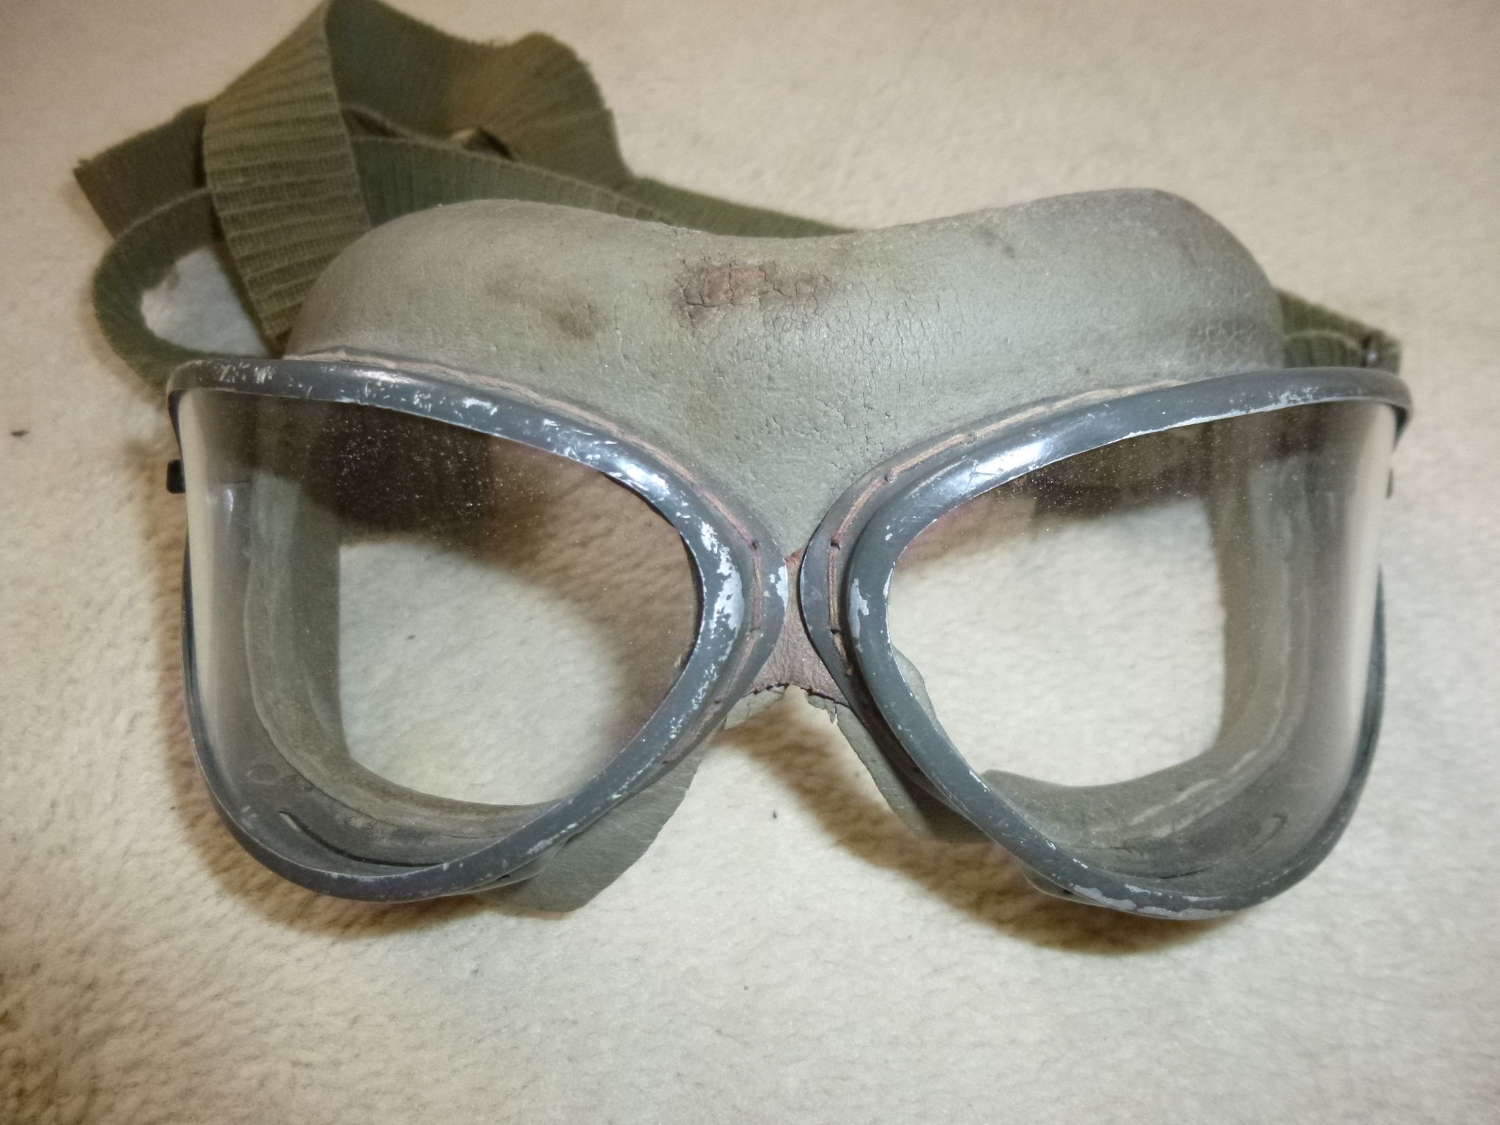 Luftwaffe Auer 295 flying goggles